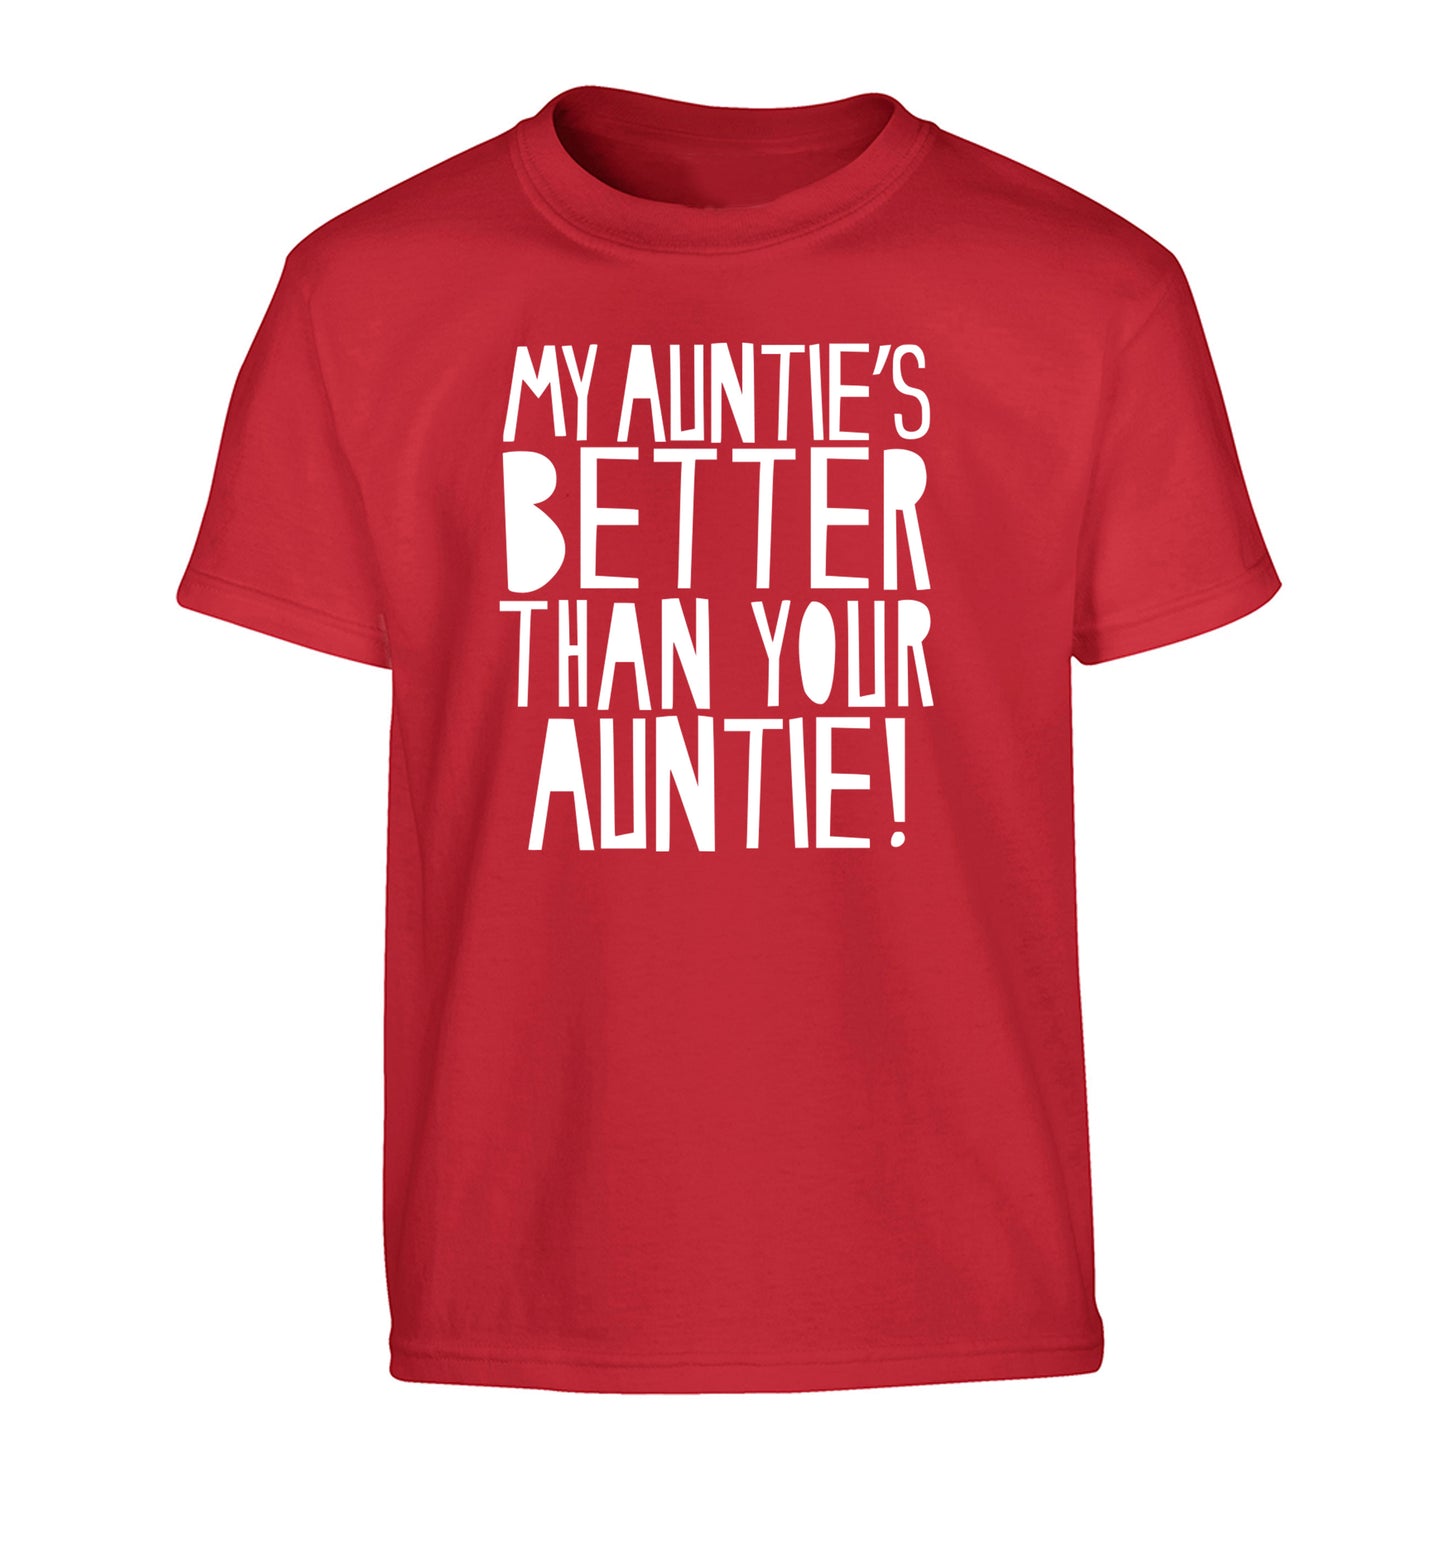 My auntie's better than your auntie Children's red Tshirt 12-13 Years